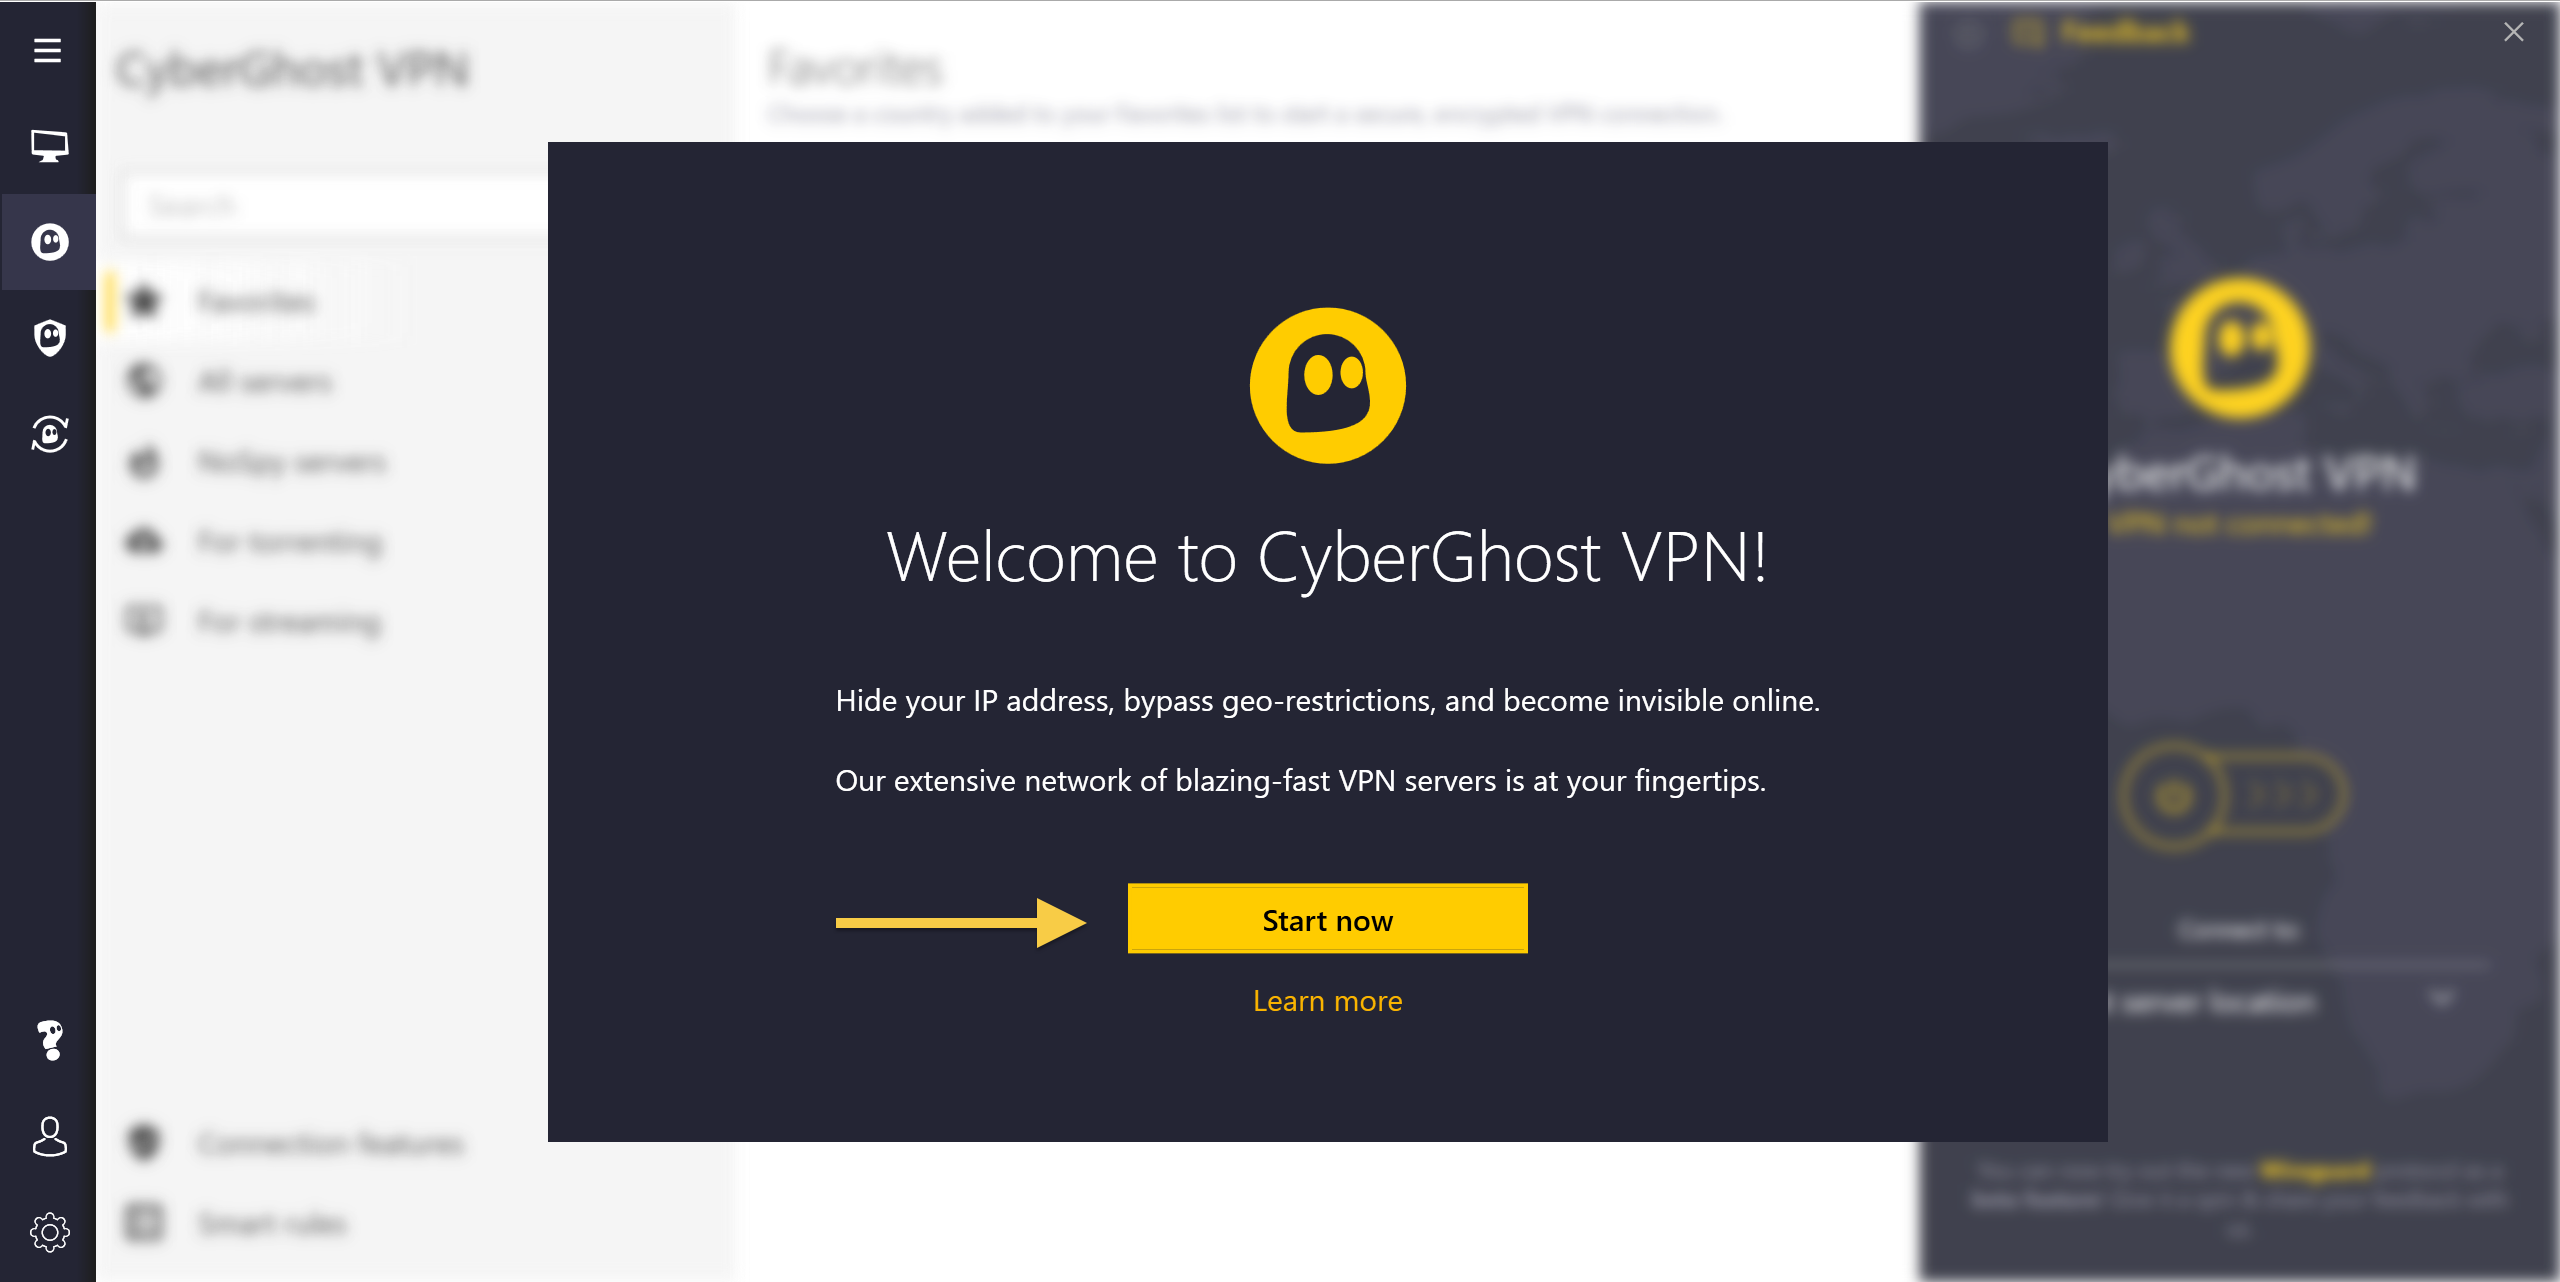 cyberghost extension for google chrome